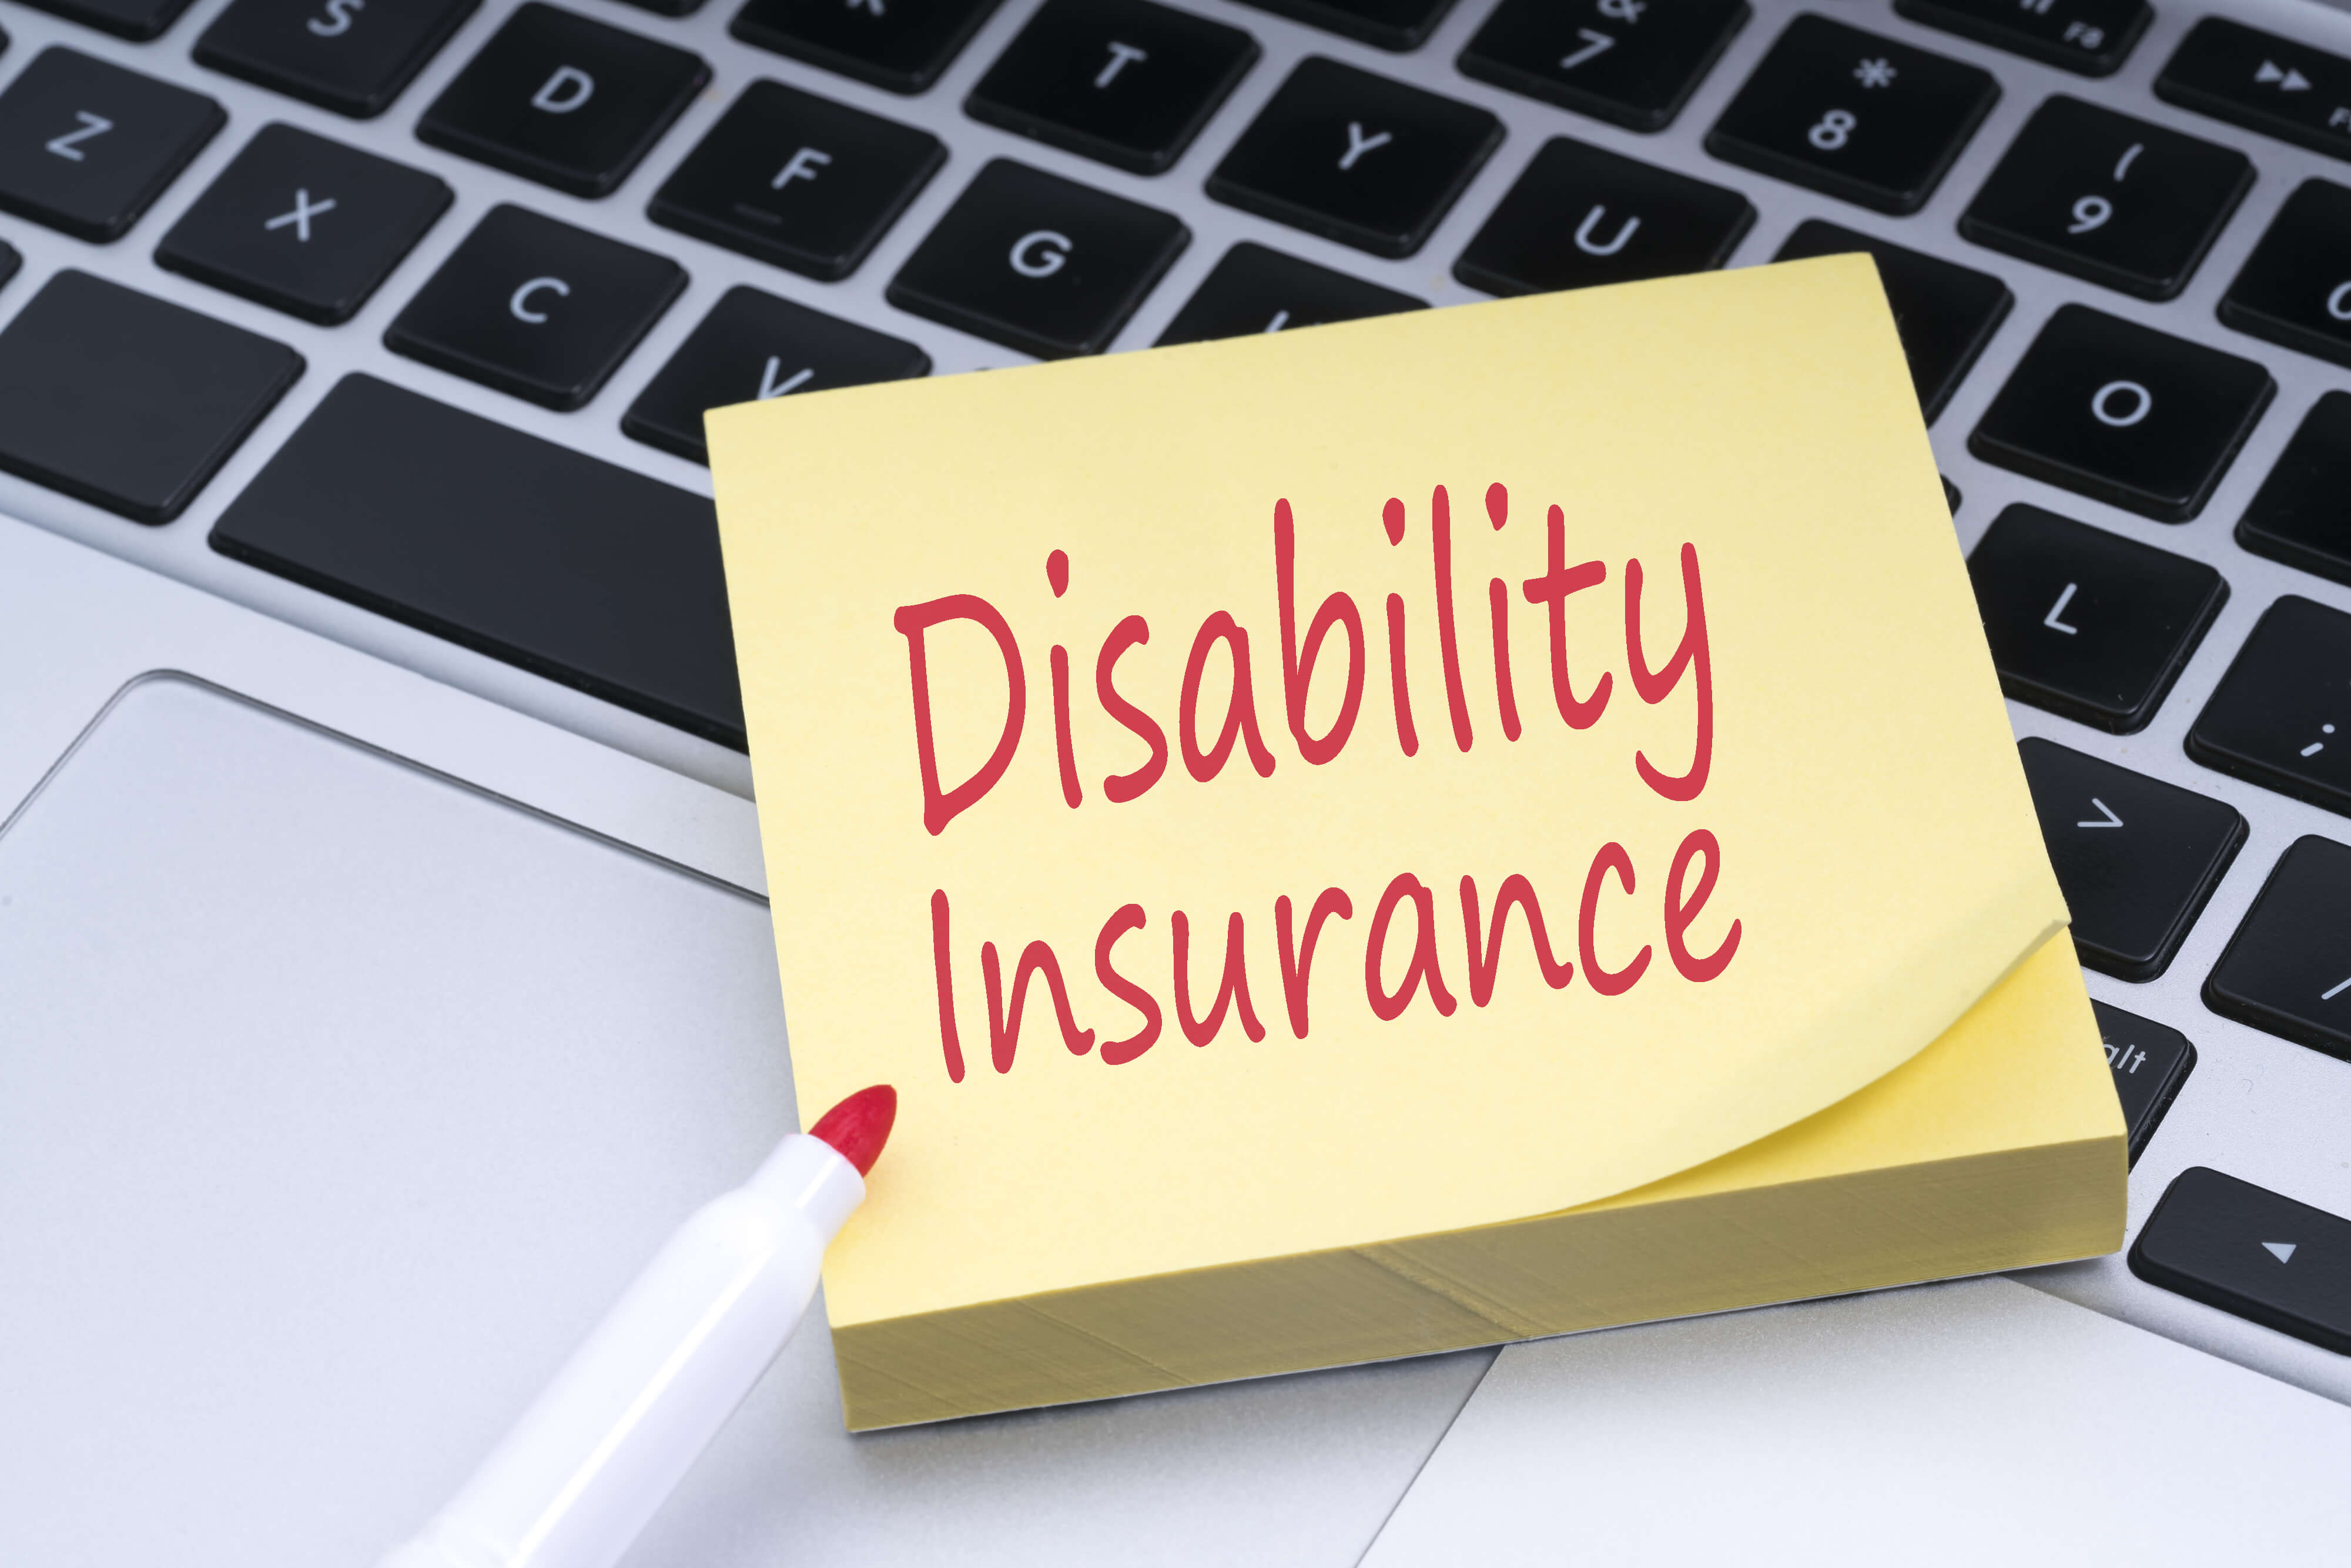 disability insurance depends on your situation